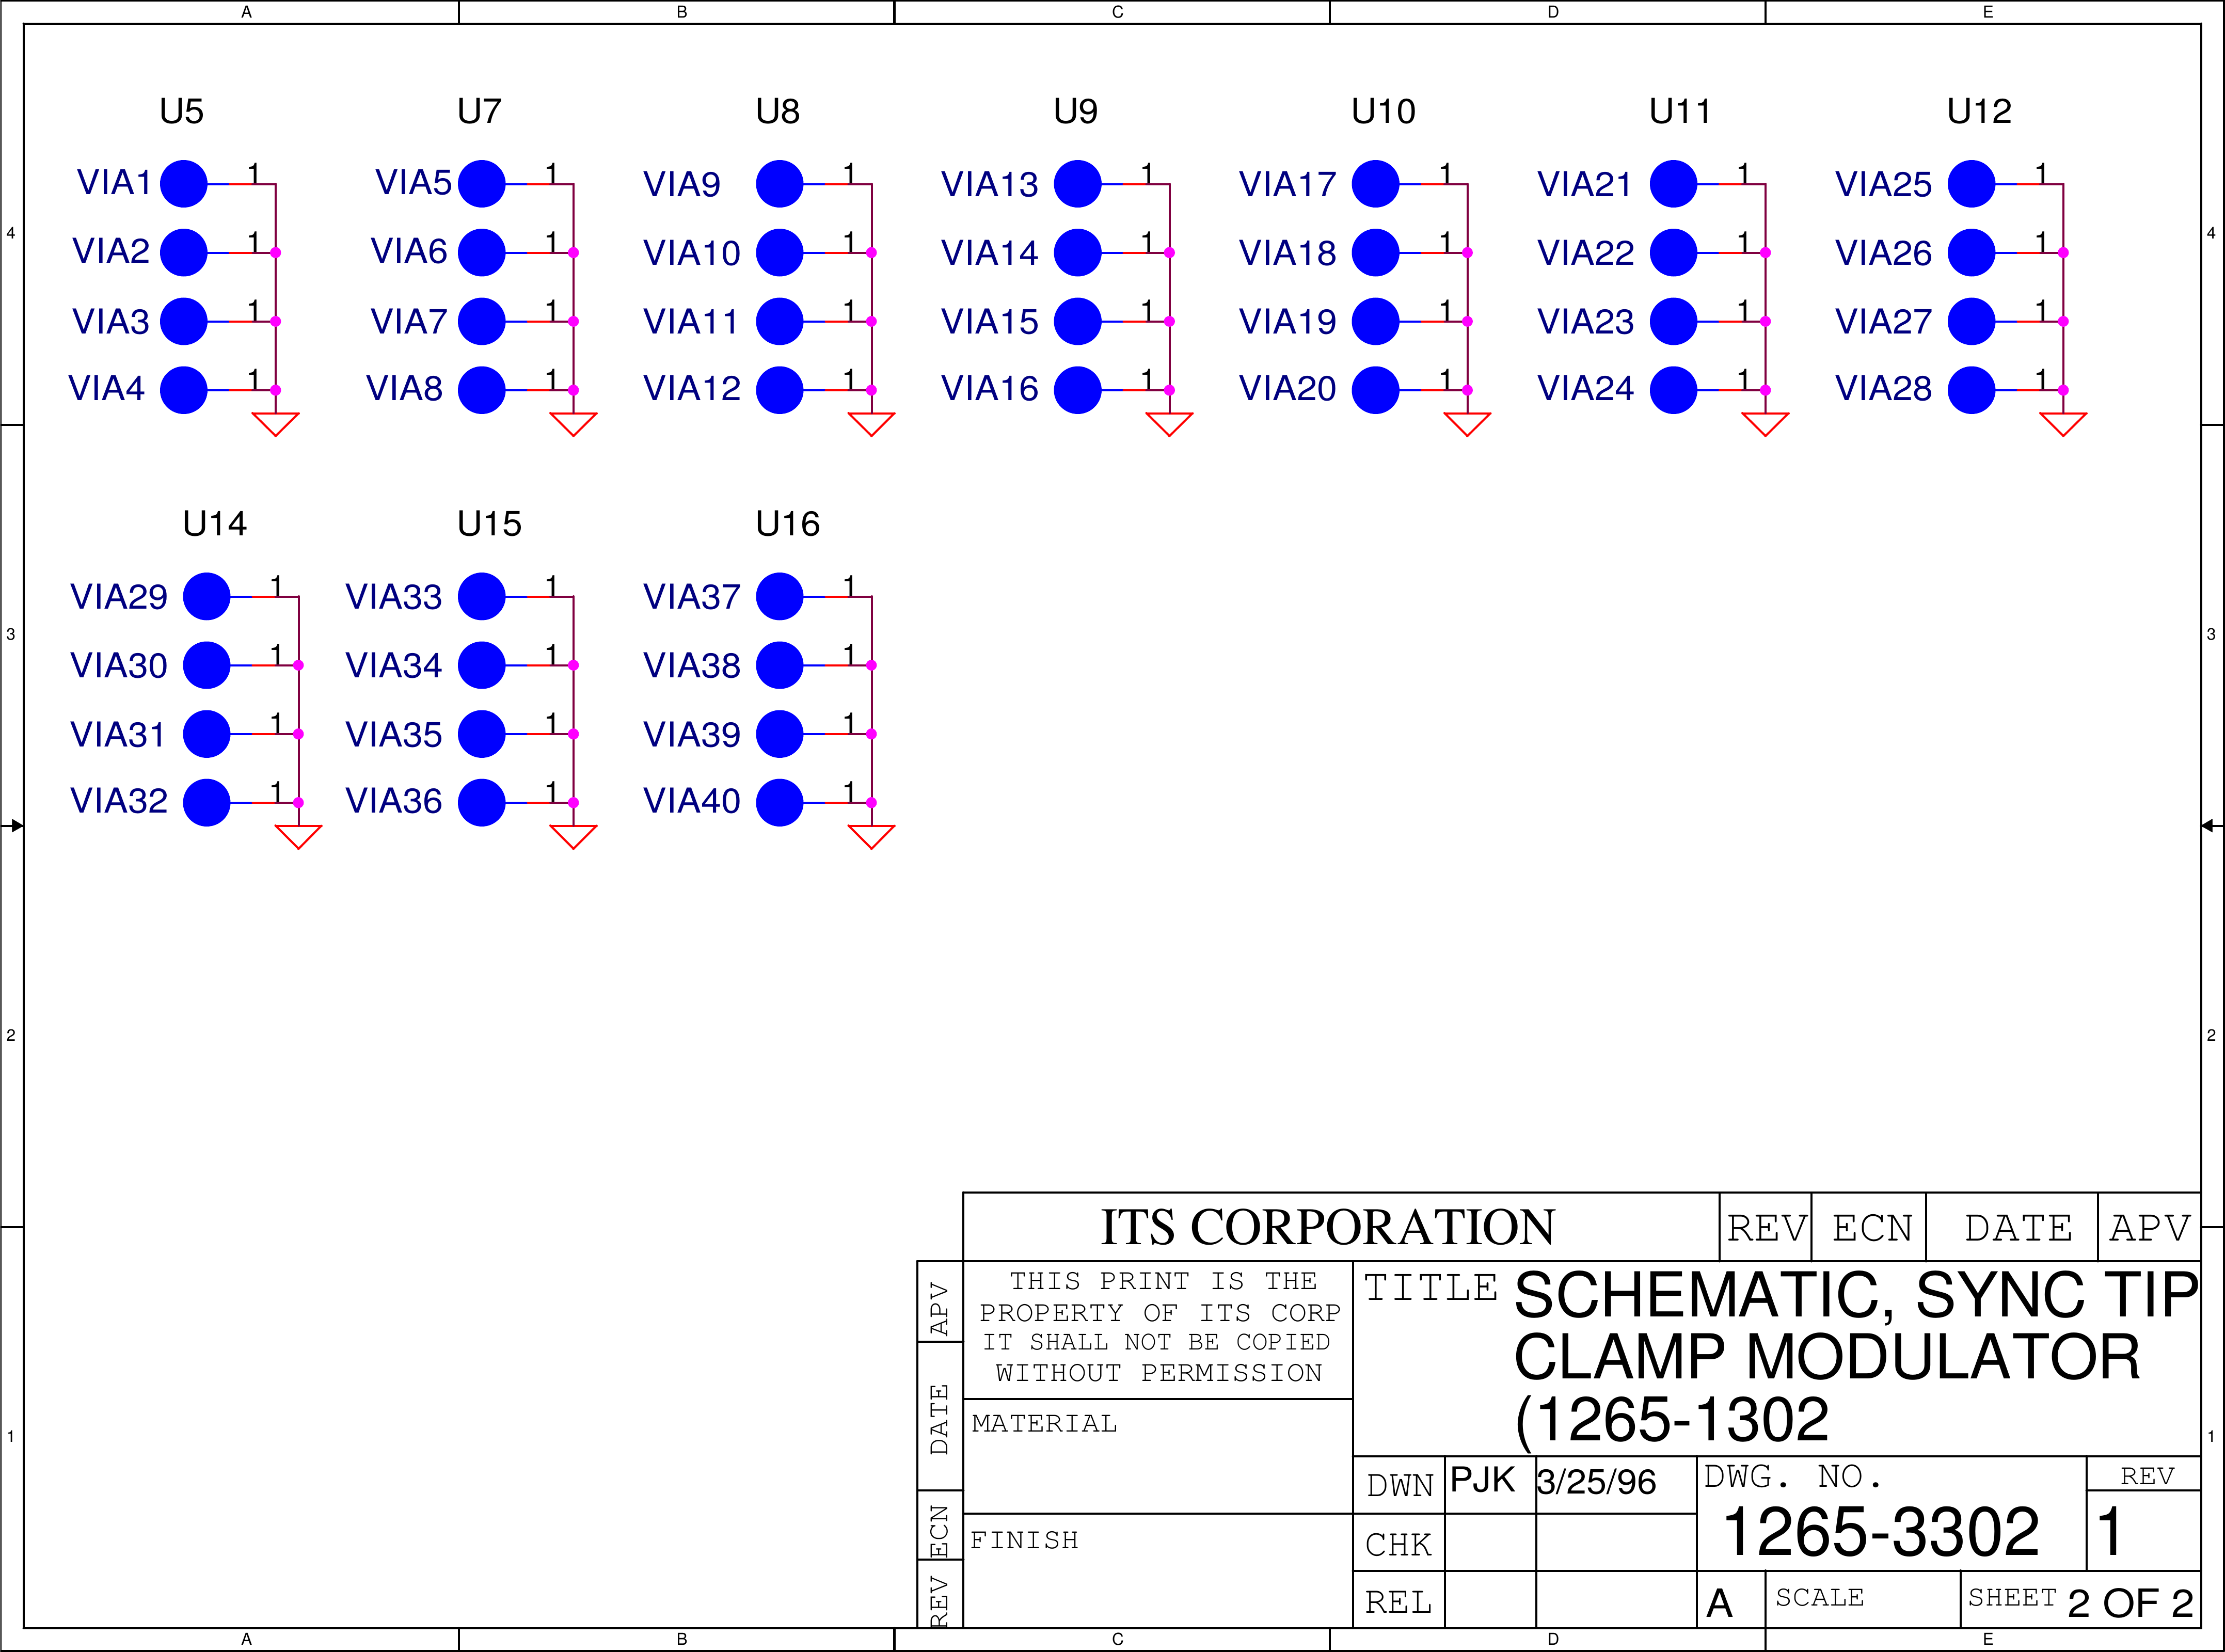 AABBCCDDEE4 43 32 21 1U5 U7 U8 U9 U10 U11 U12U14 U15 U161265-3302 1SCHEMATIC, SYNC TIPCLAMP MODULATOR(1265-1302PJK 3/25/96A2 OF 2ITS CORPORATIONREV ECN DATE APVTITLETHIS PRINT IS THEPROPERTY OF ITS CORPIT SHALL NOT BE COPIEDWITHOUT PERMISSIONMATERIALFINISHDWNCHKRELSCALE SHEETREVREV ECN DATE APVDWG. NO.VIA21 VIA41 VIA31 VIA11 VIA61 VIA81 VIA71 VIA51 VIA101 VIA91 VIA121 VIA111 VIA161 VIA151 VIA141 VIA131 VIA201 VIA181 VIA191 VIA171 VIA231 VIA211 VIA221 VIA241 VIA281 VIA251 VIA271 VIA261 VIA321 VIA291 VIA311 VIA301 VIA361 VIA331 VIA351 VIA341 VIA401 VIA371 VIA391 VIA381 